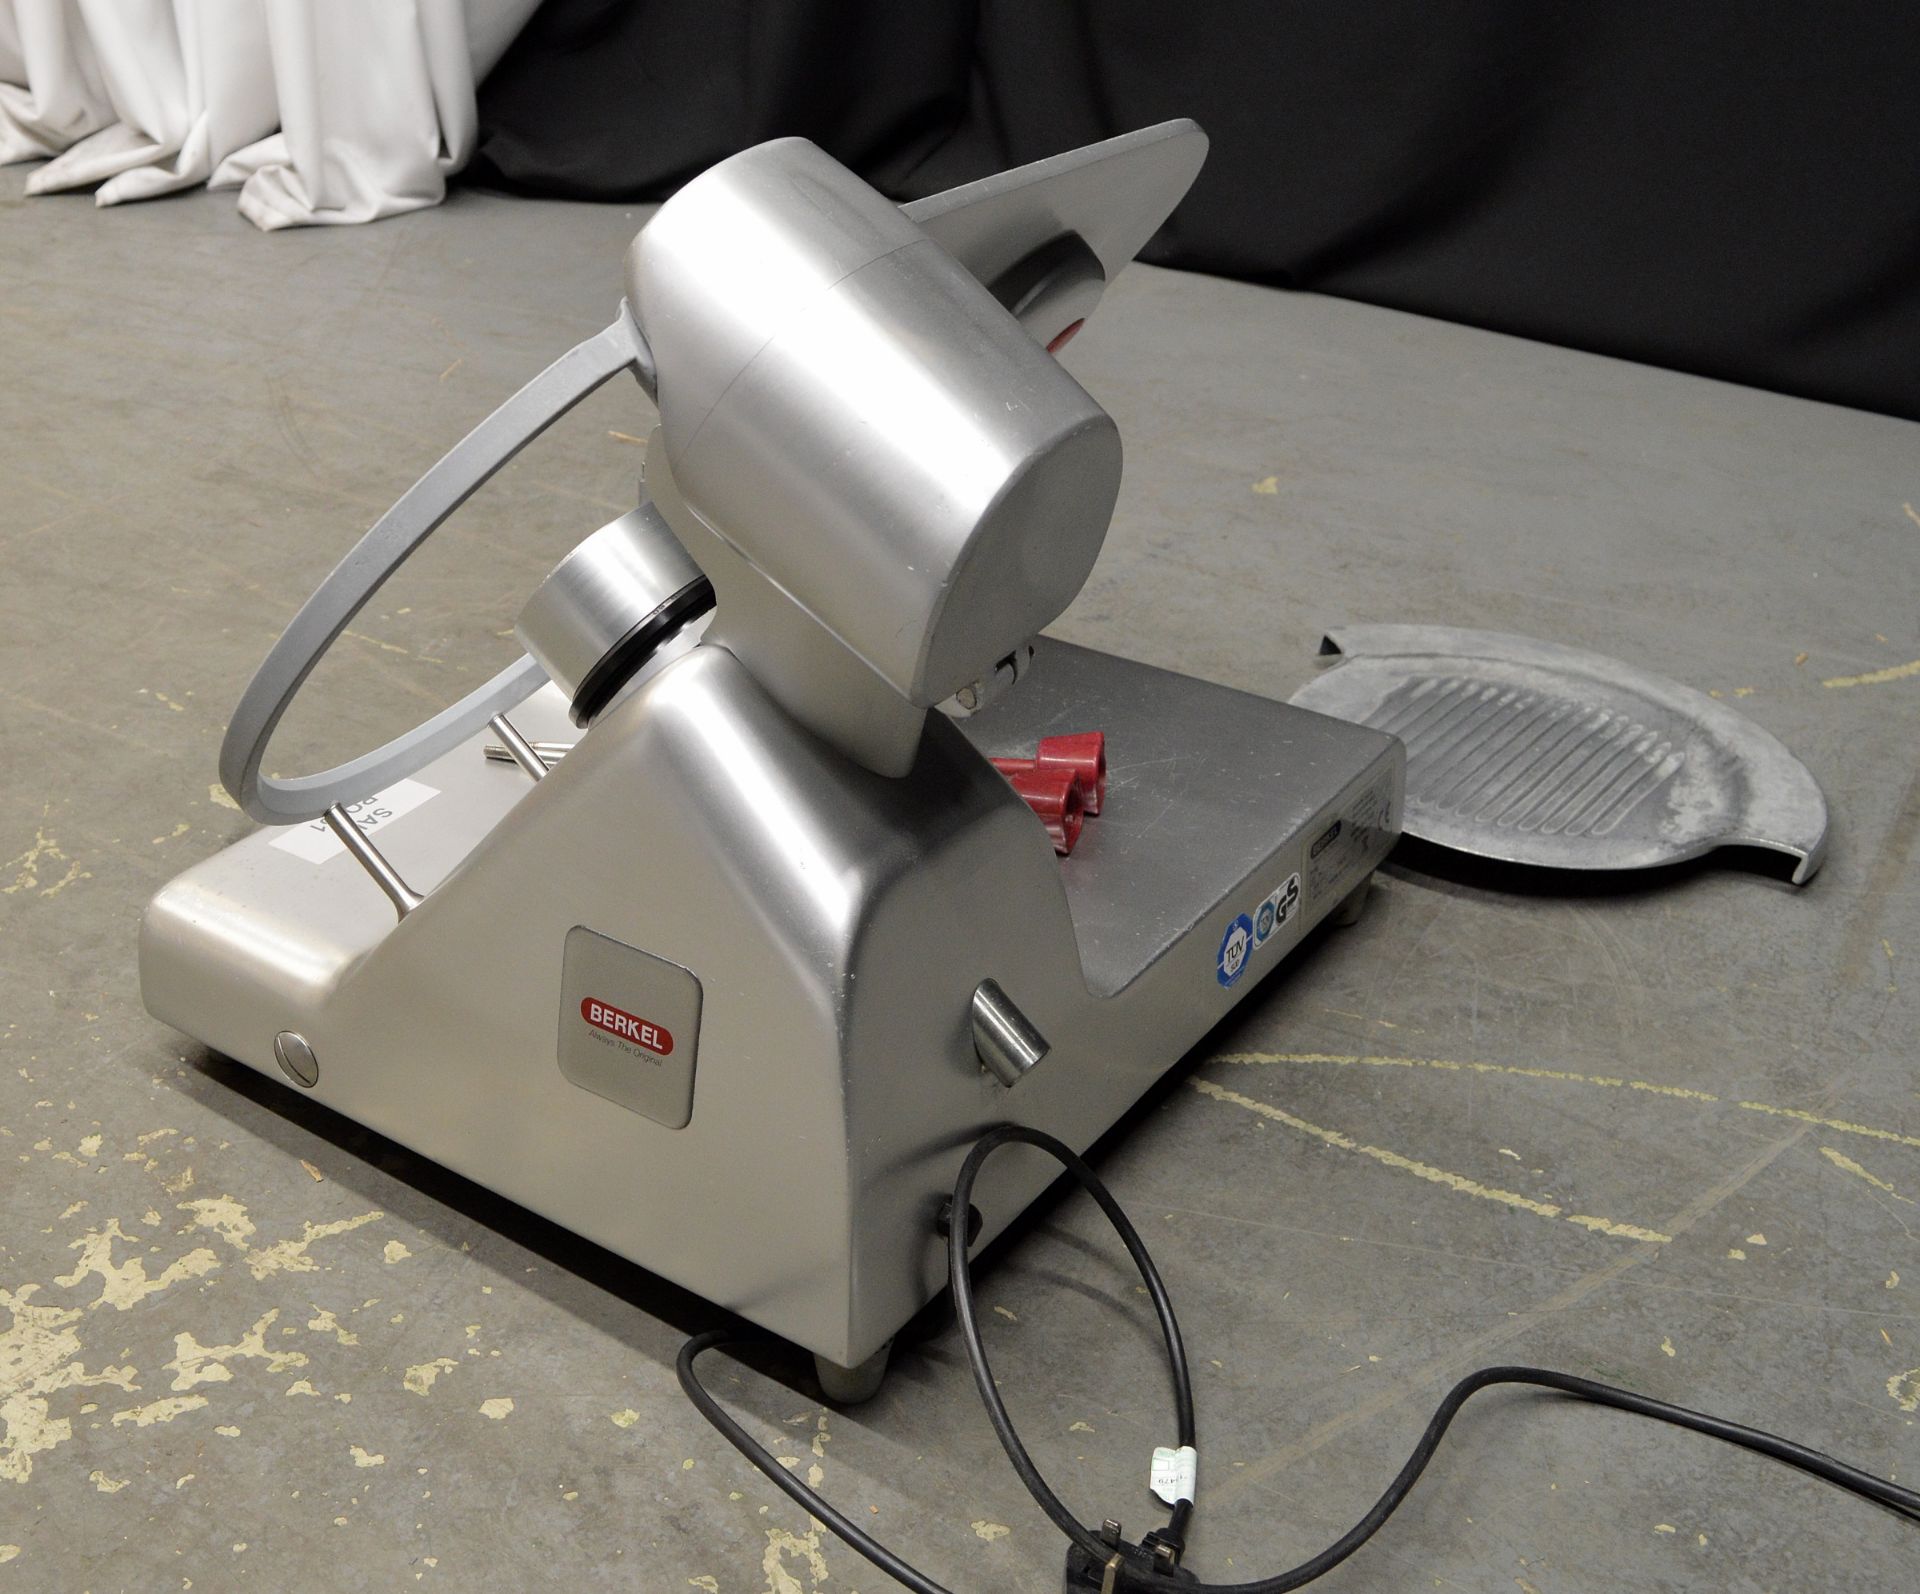 Berkel BSPGL04011A0F 12" Commercial Cooked Meat / Bacon Slicer, single phase electric - Image 4 of 7